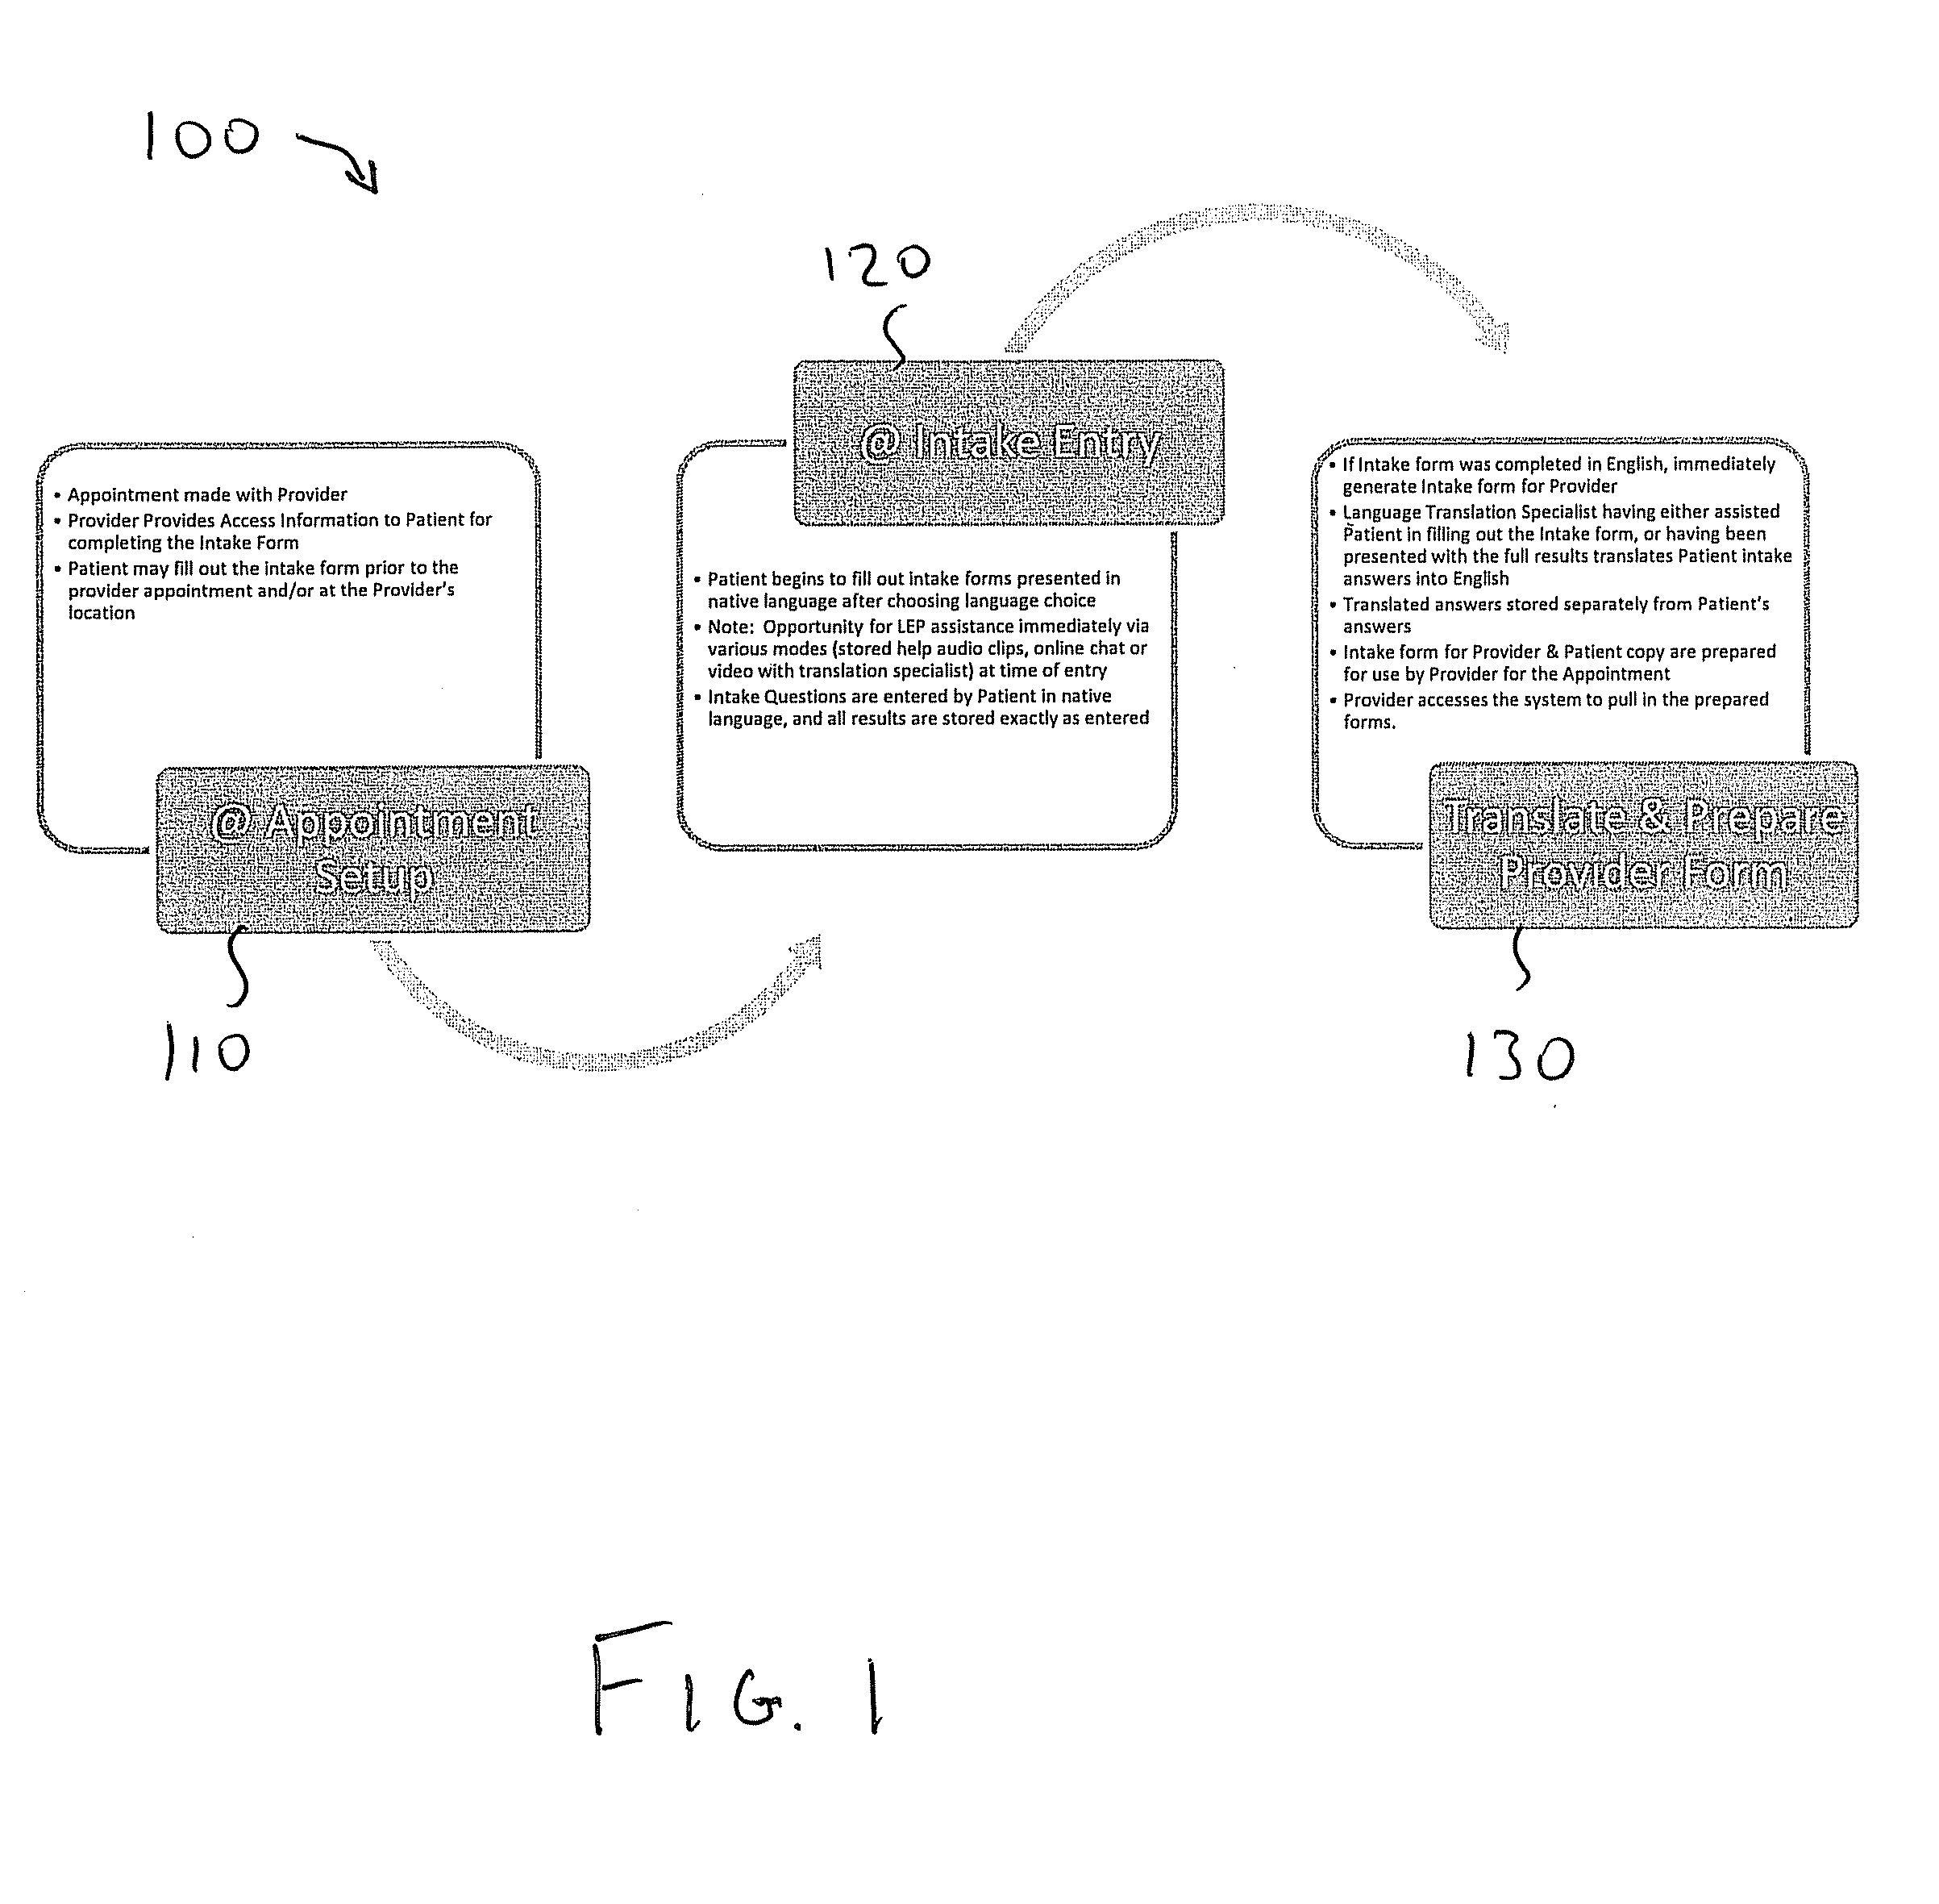 System and method for managing a form completion process